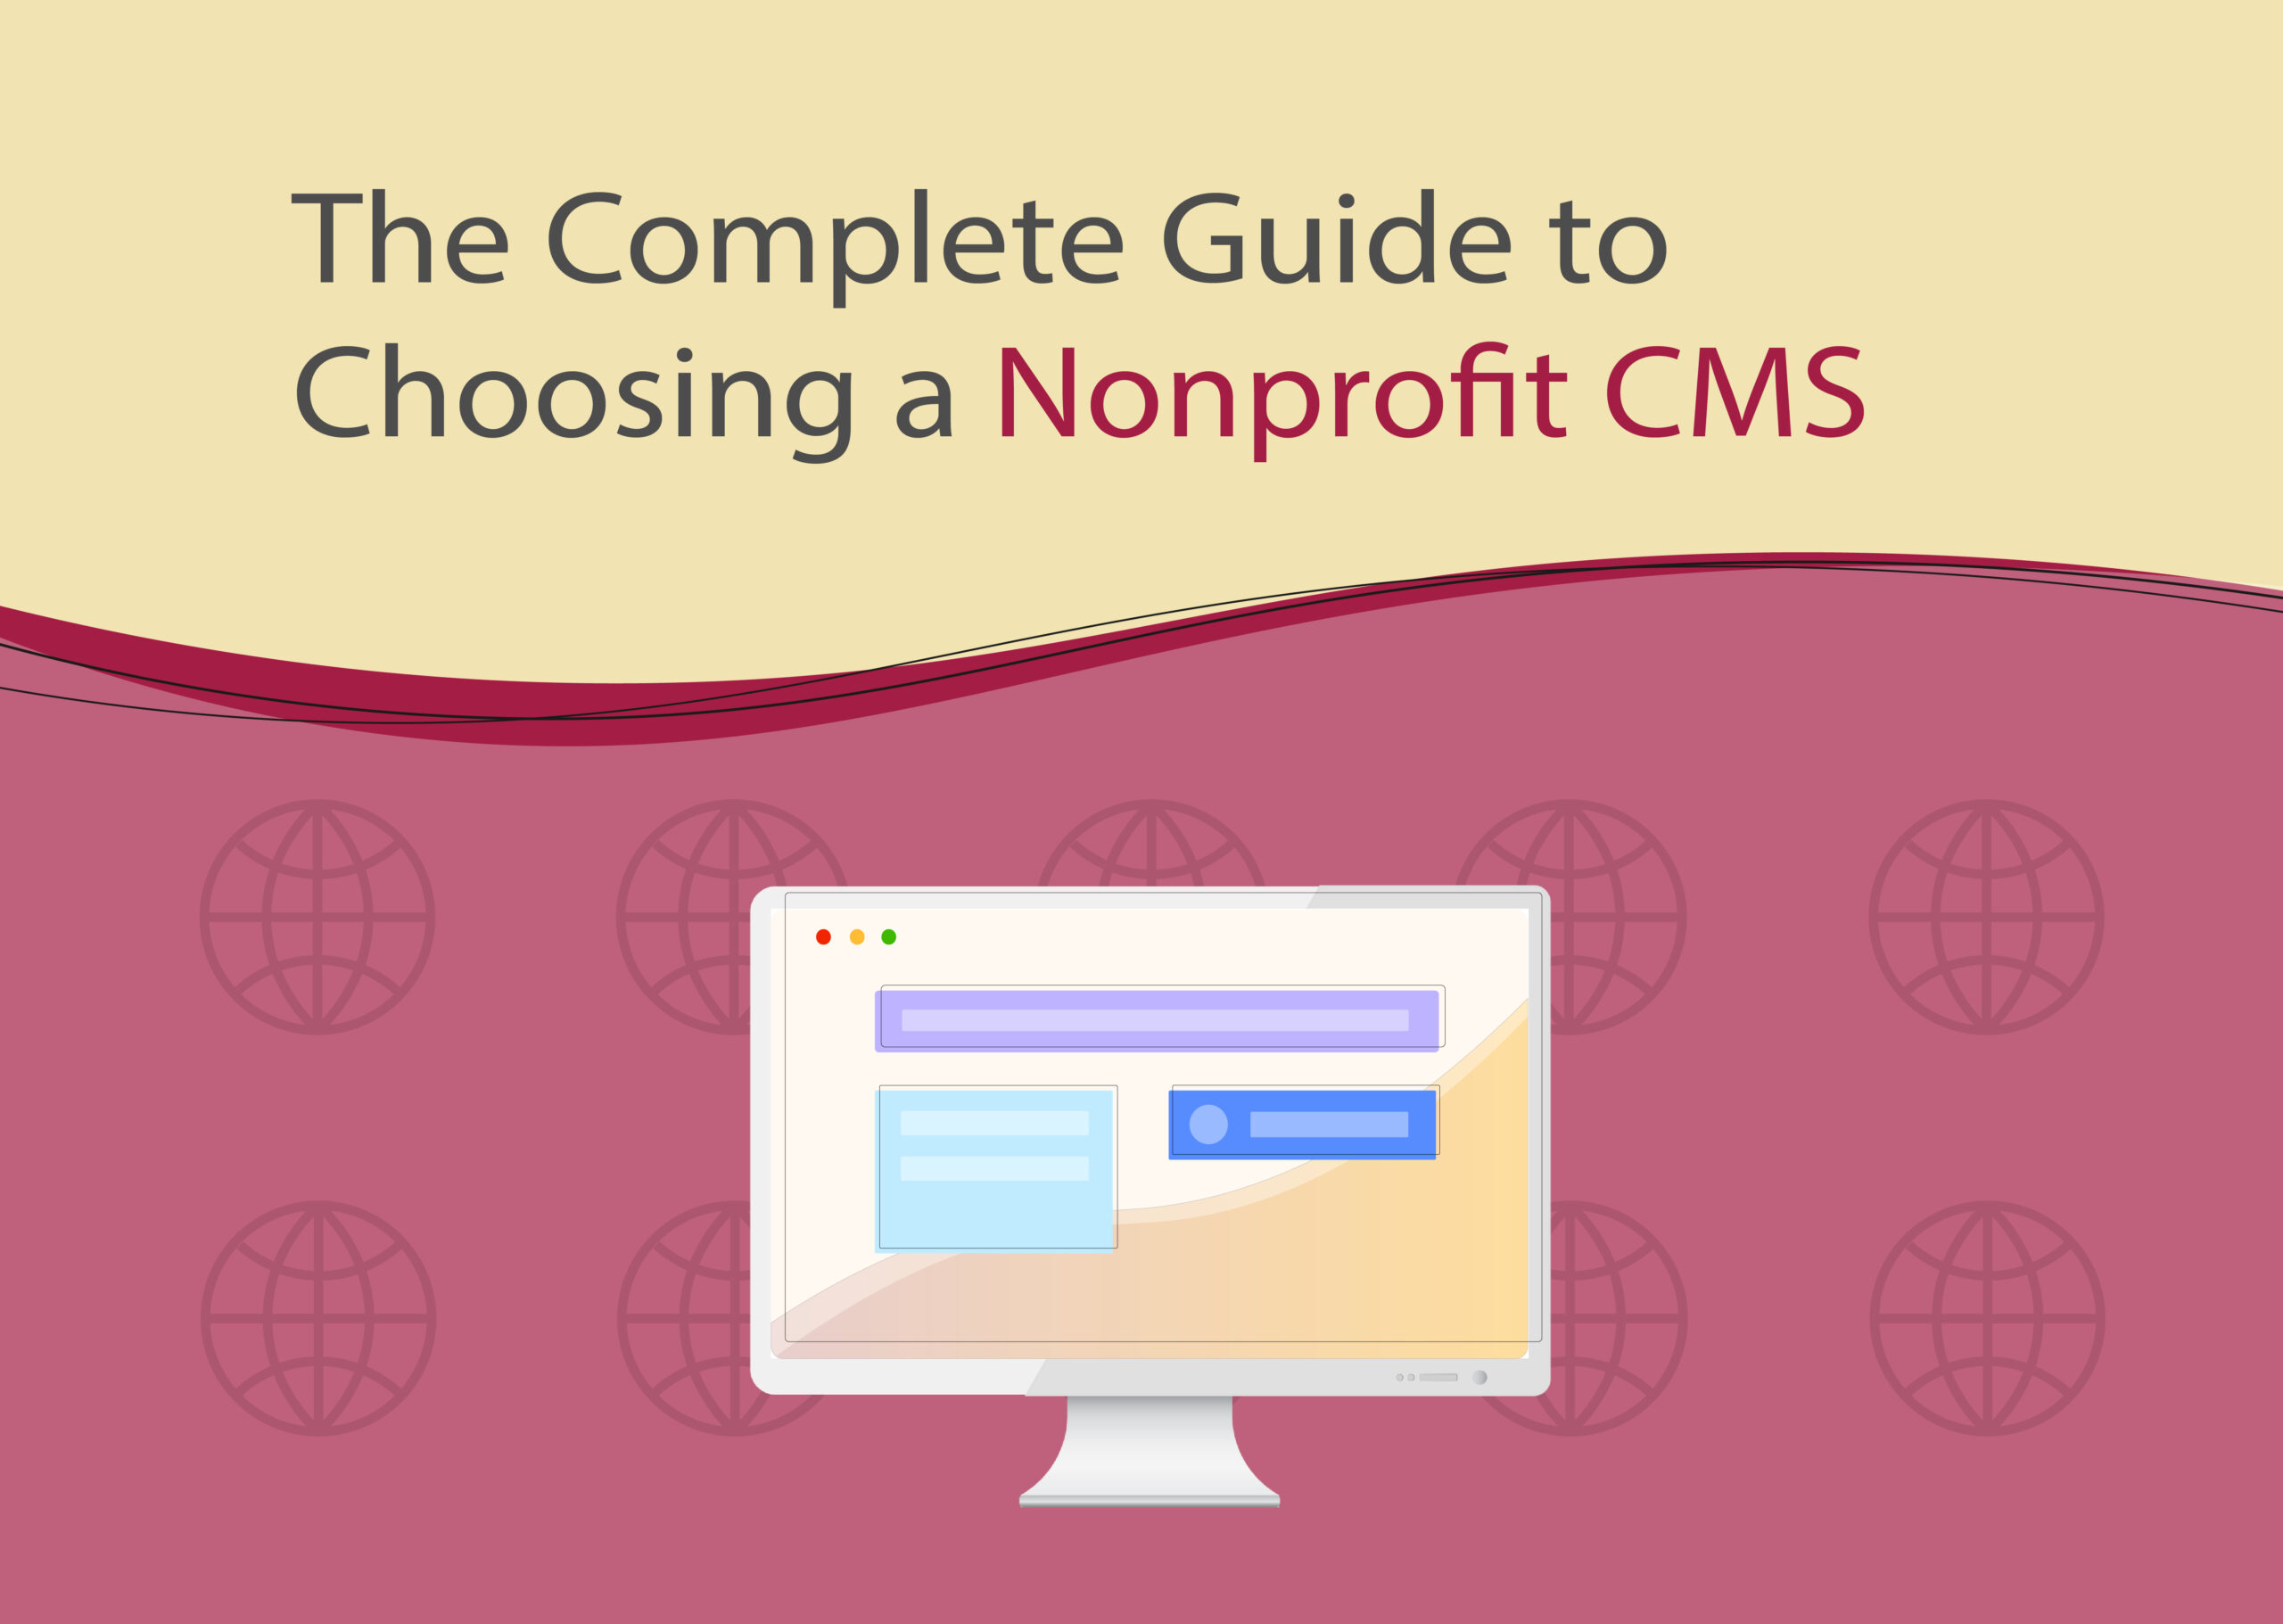 The Complete Guide to Choosing a Nonprofit CMS